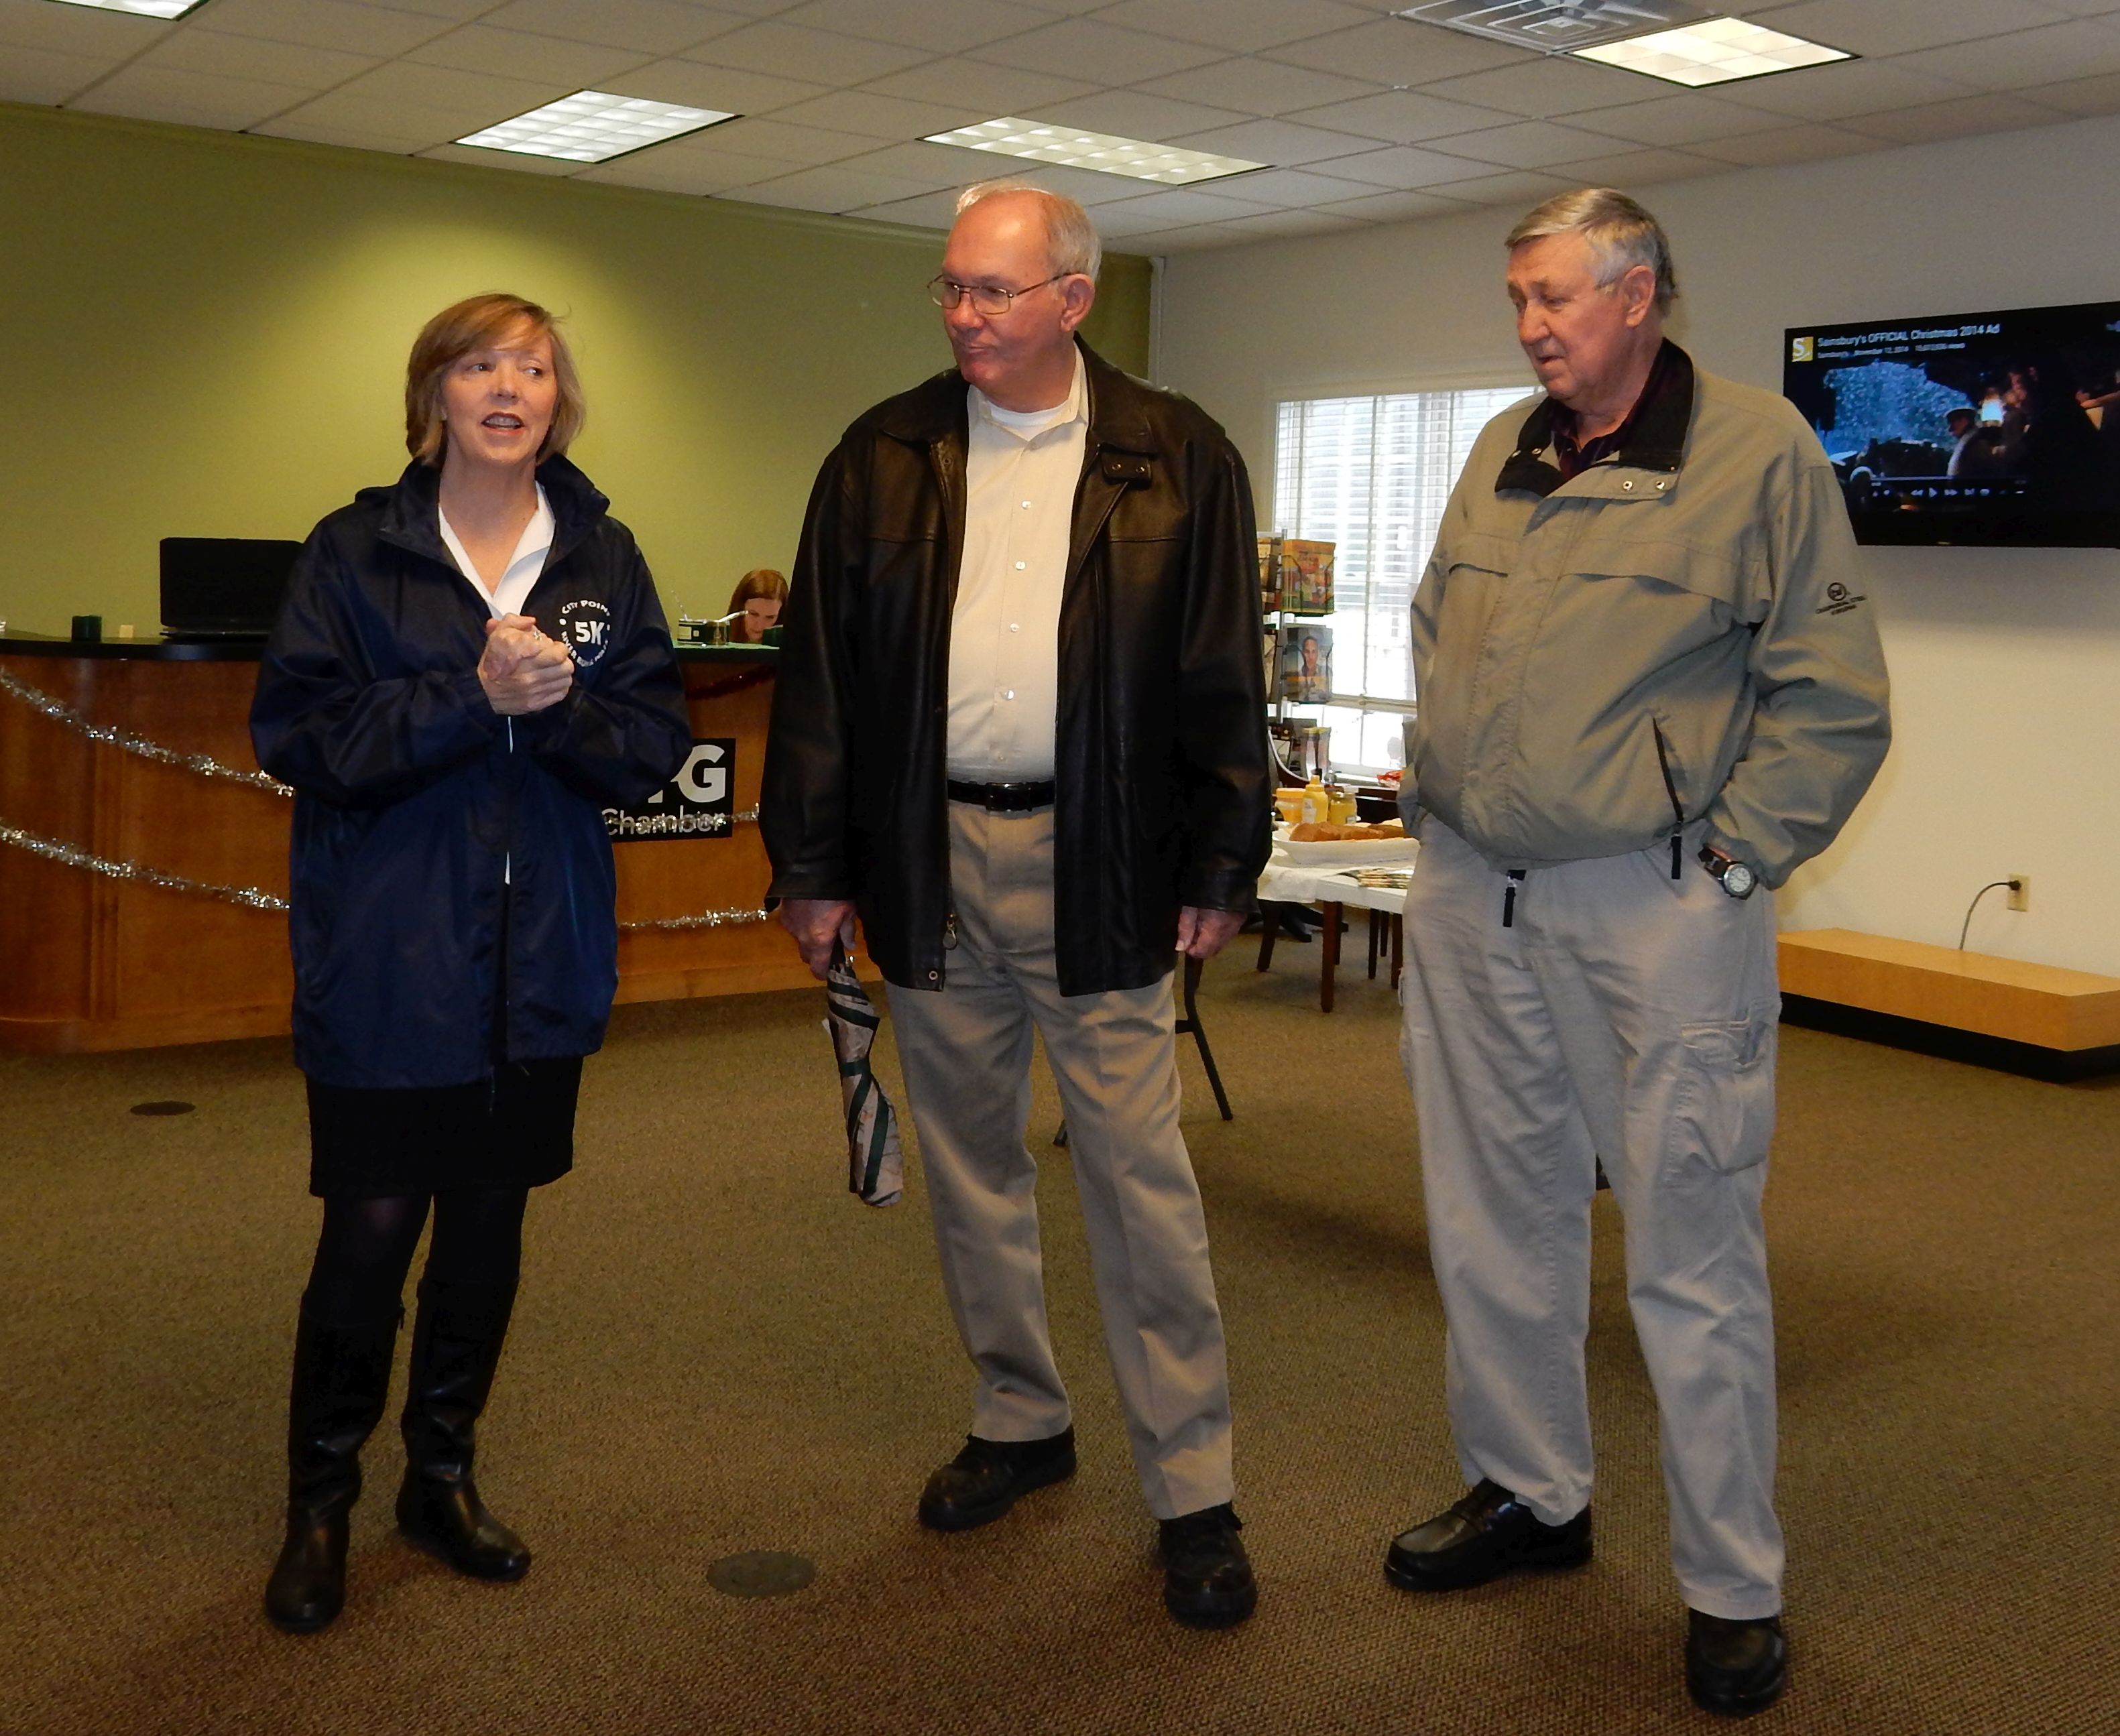 Becky McDonough welcomes guests to the Hopewell/Prince George Visitor Center with  Bill Robertson, chairman of the Prince George County Board of Supervisors, and  PG Board Member Jerry Skalsky.